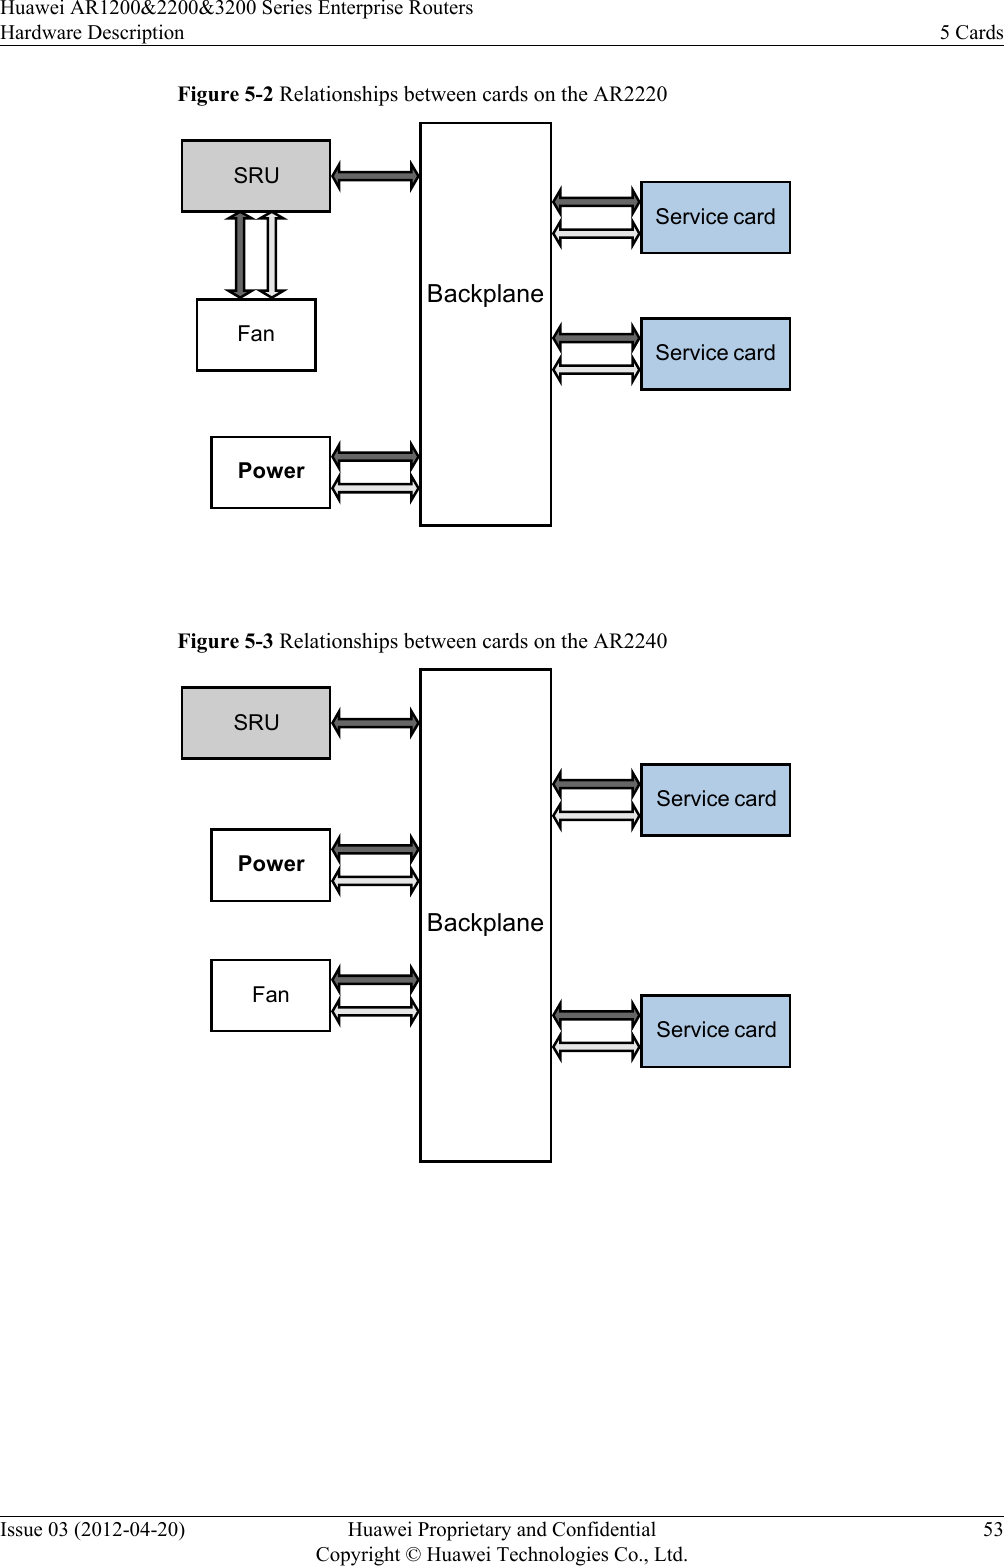 Figure 5-2 Relationships between cards on the AR2220PowerBackplaneSRUFanService cardService card Figure 5-3 Relationships between cards on the AR2240PowerFanBackplaneSRUService cardService card Huawei AR1200&amp;2200&amp;3200 Series Enterprise RoutersHardware Description 5 CardsIssue 03 (2012-04-20) Huawei Proprietary and ConfidentialCopyright © Huawei Technologies Co., Ltd.53